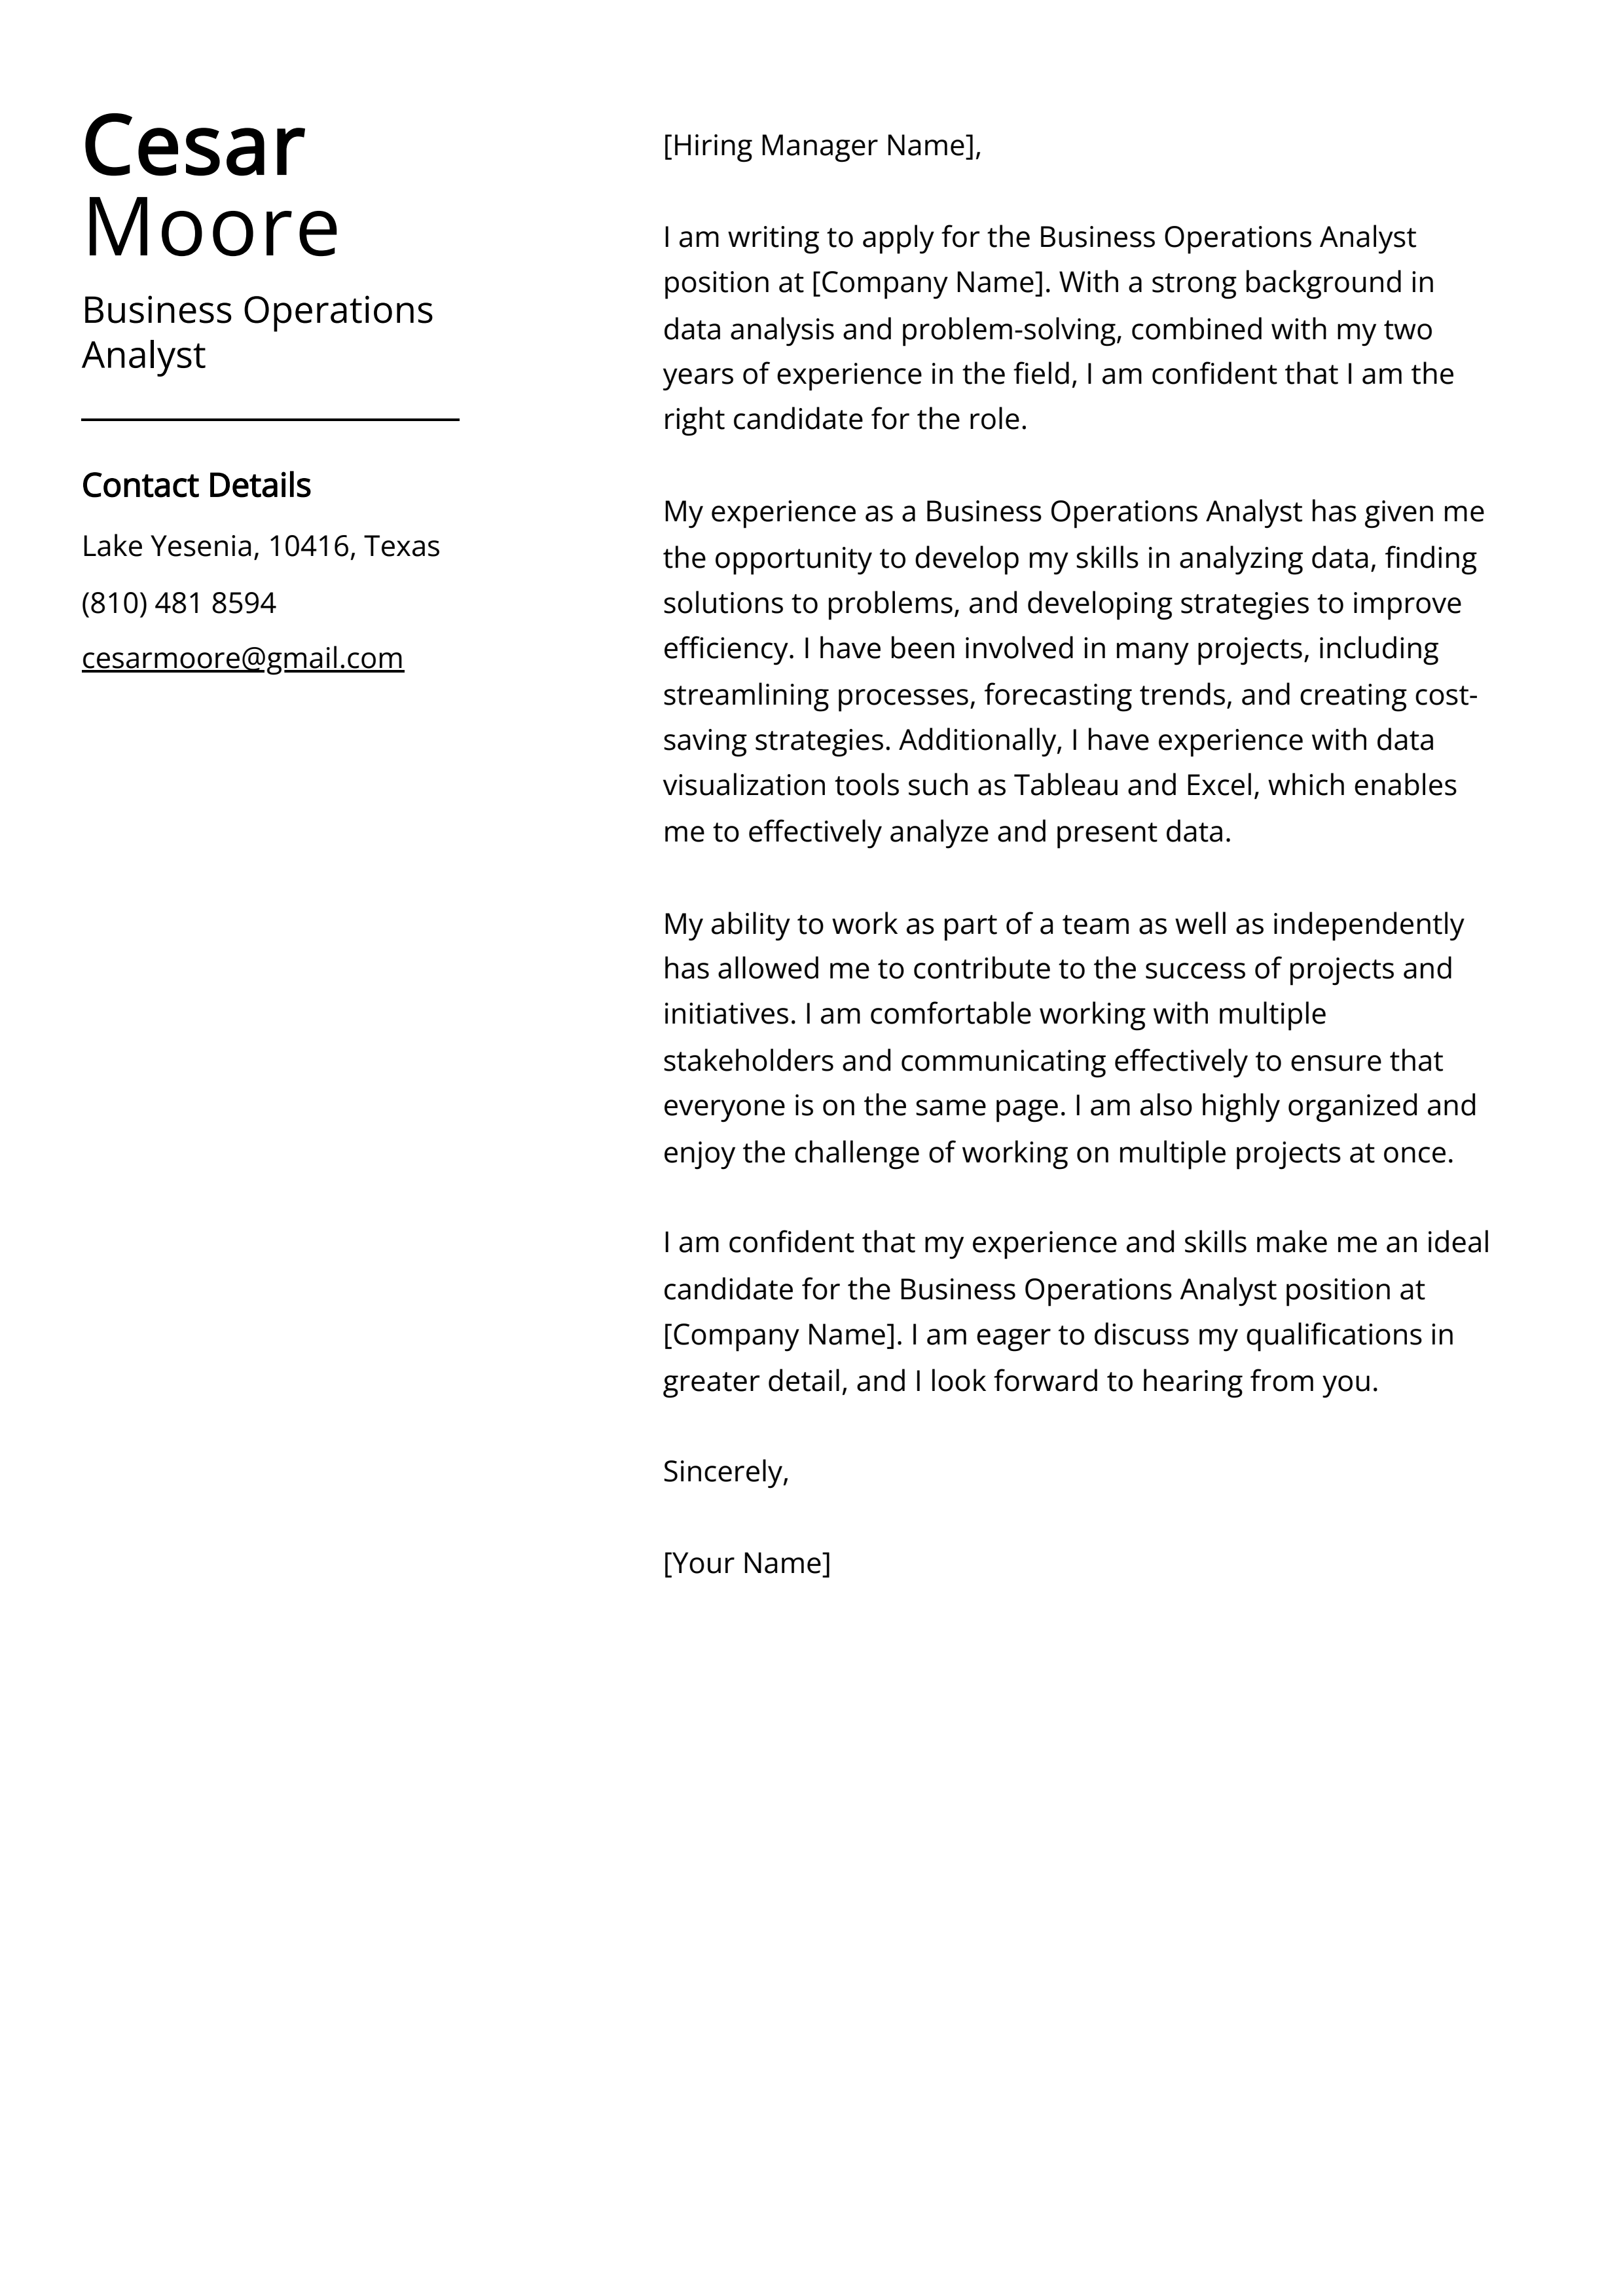 Business Operations Analyst Cover Letter Example